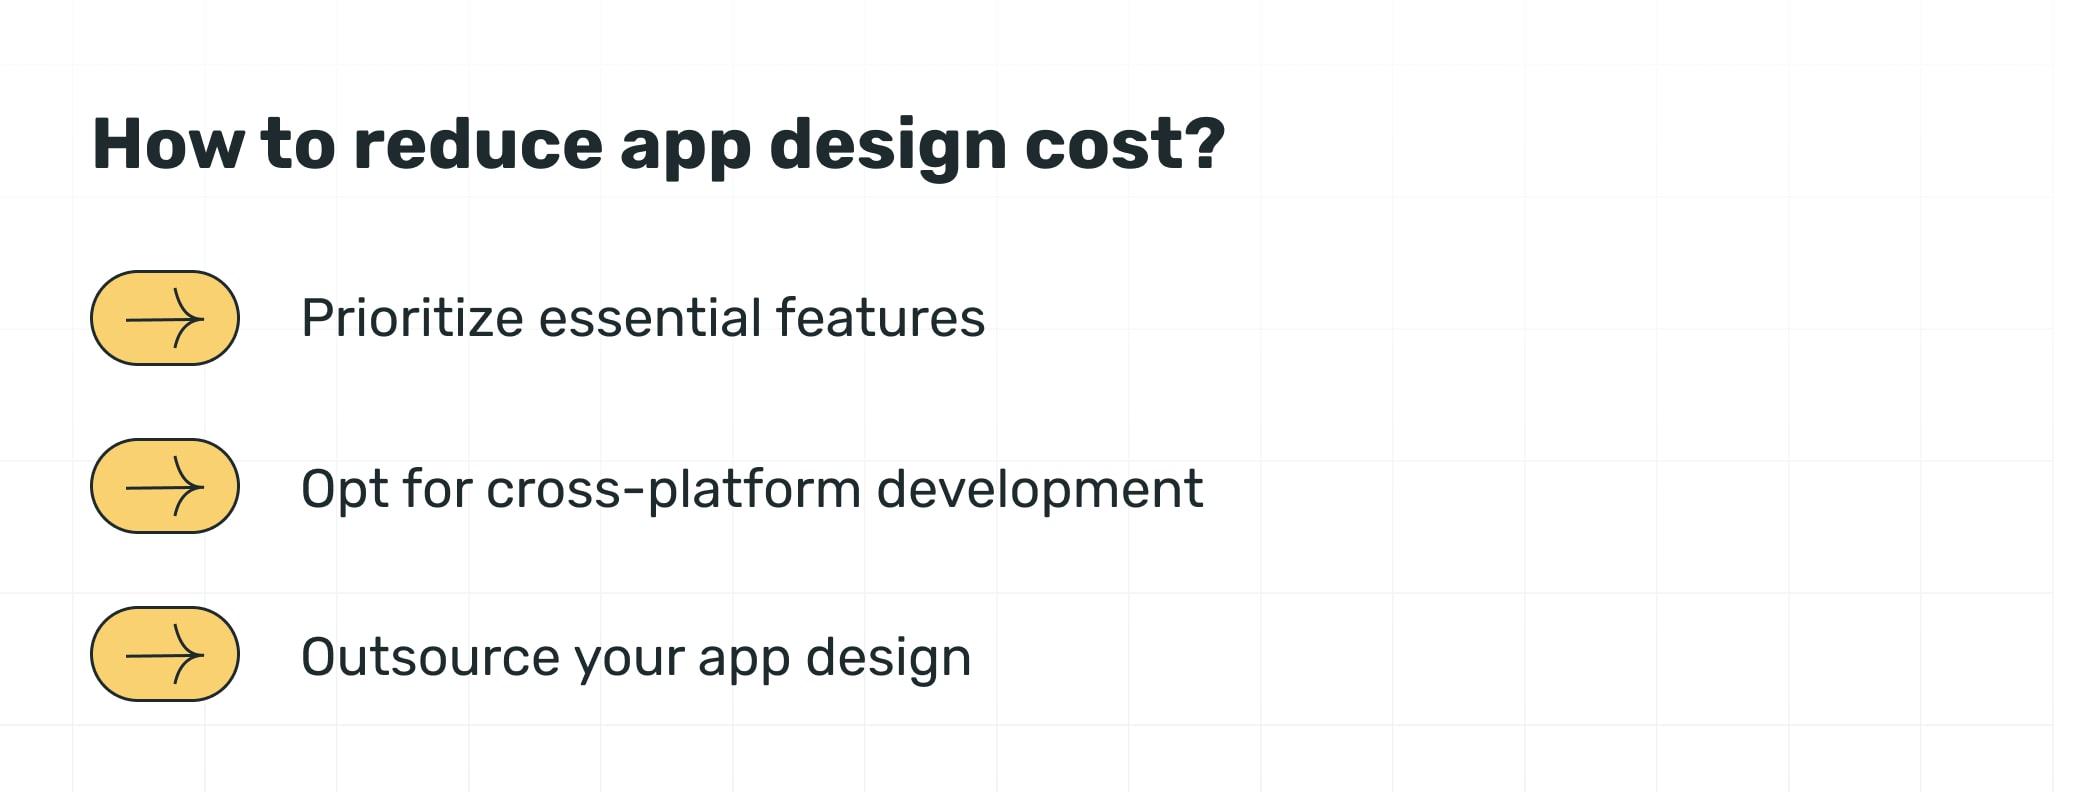 How to reduce app design cost?